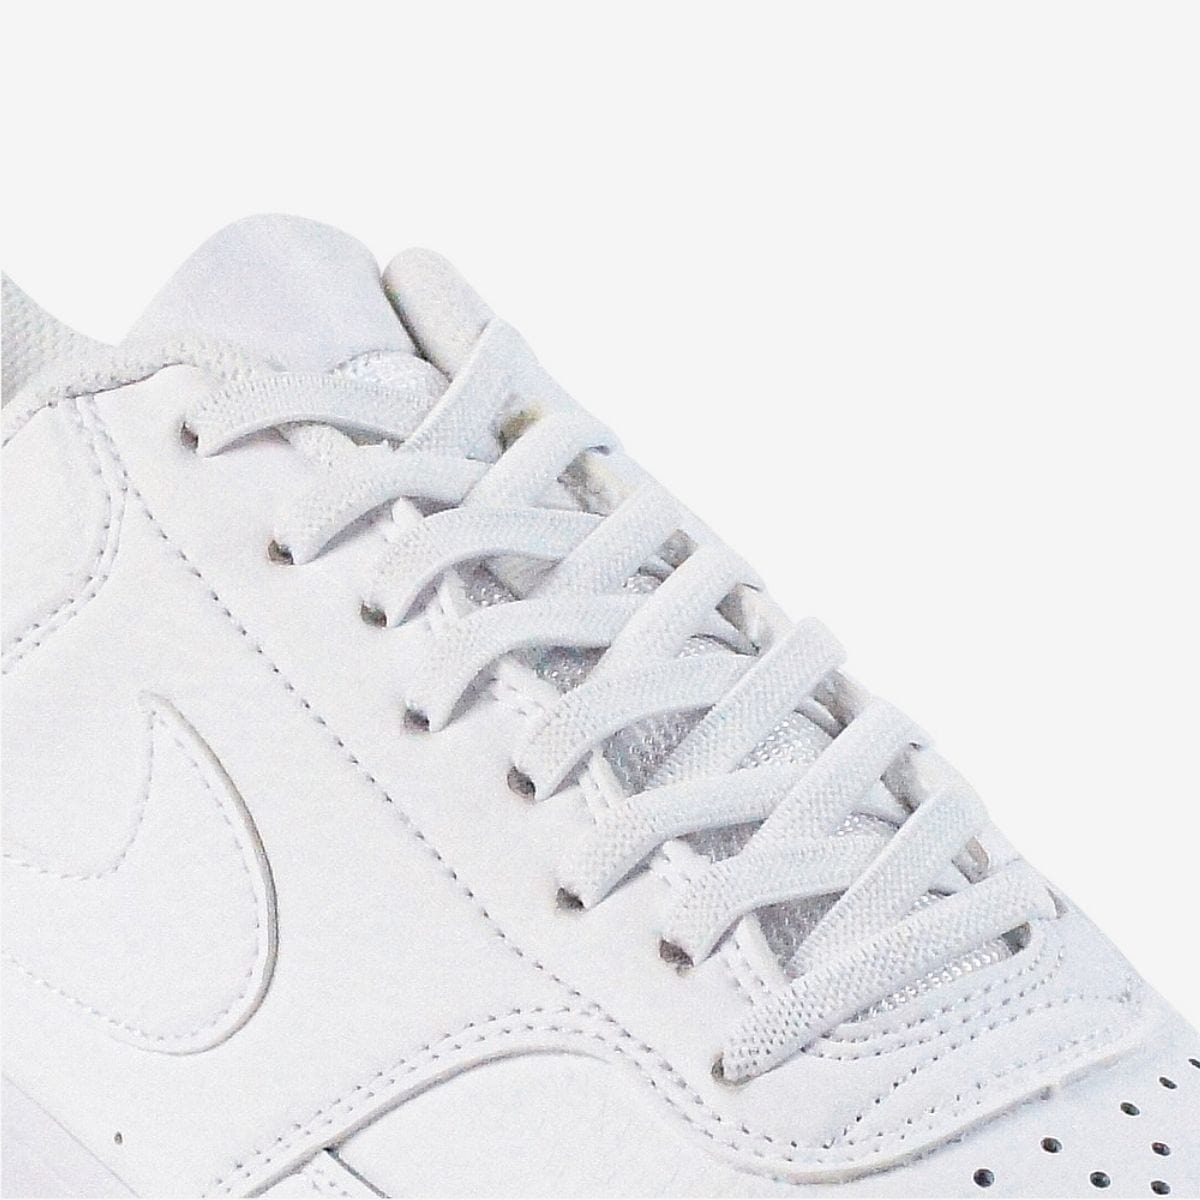 kids-no-tie-shoelaces-with-white-laces-on-nike-white-sneakers-by-kicks-shoelaces